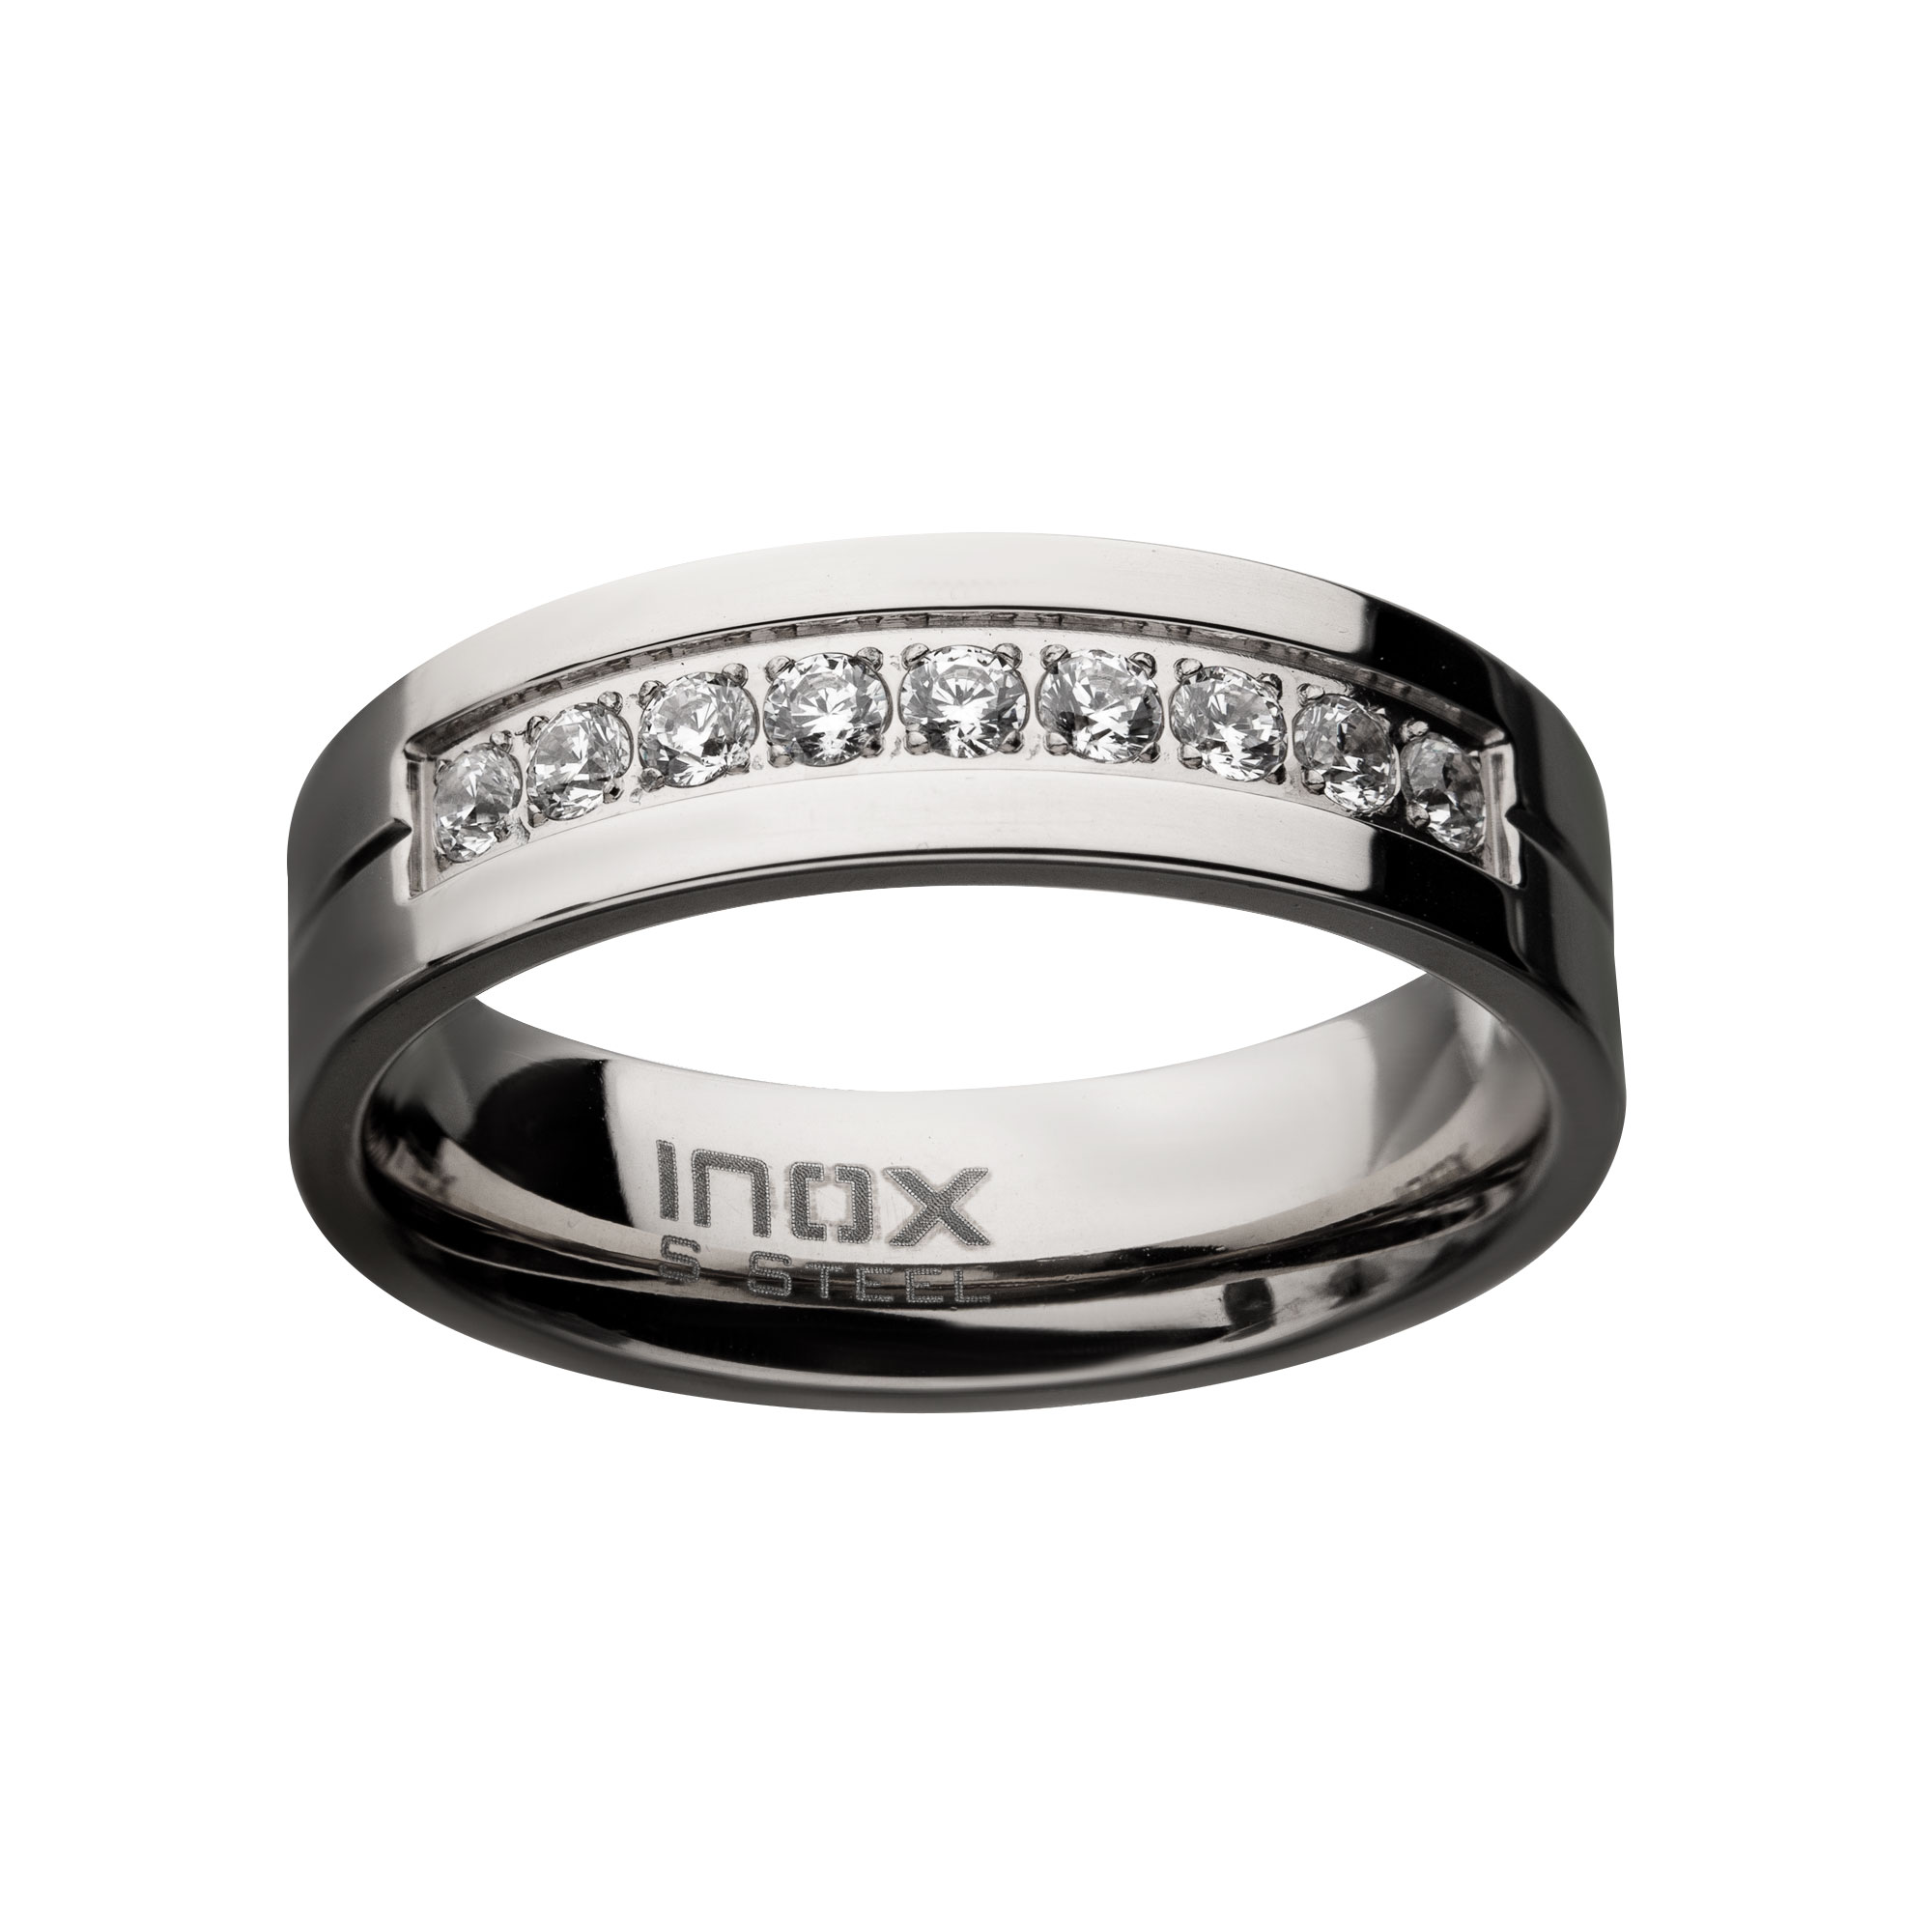 Stainless Steel Polished Steel ComfortFit Band with CZ's in Bead Channel Setting Ring Image 2 Lewis Jewelers, Inc. Ansonia, CT